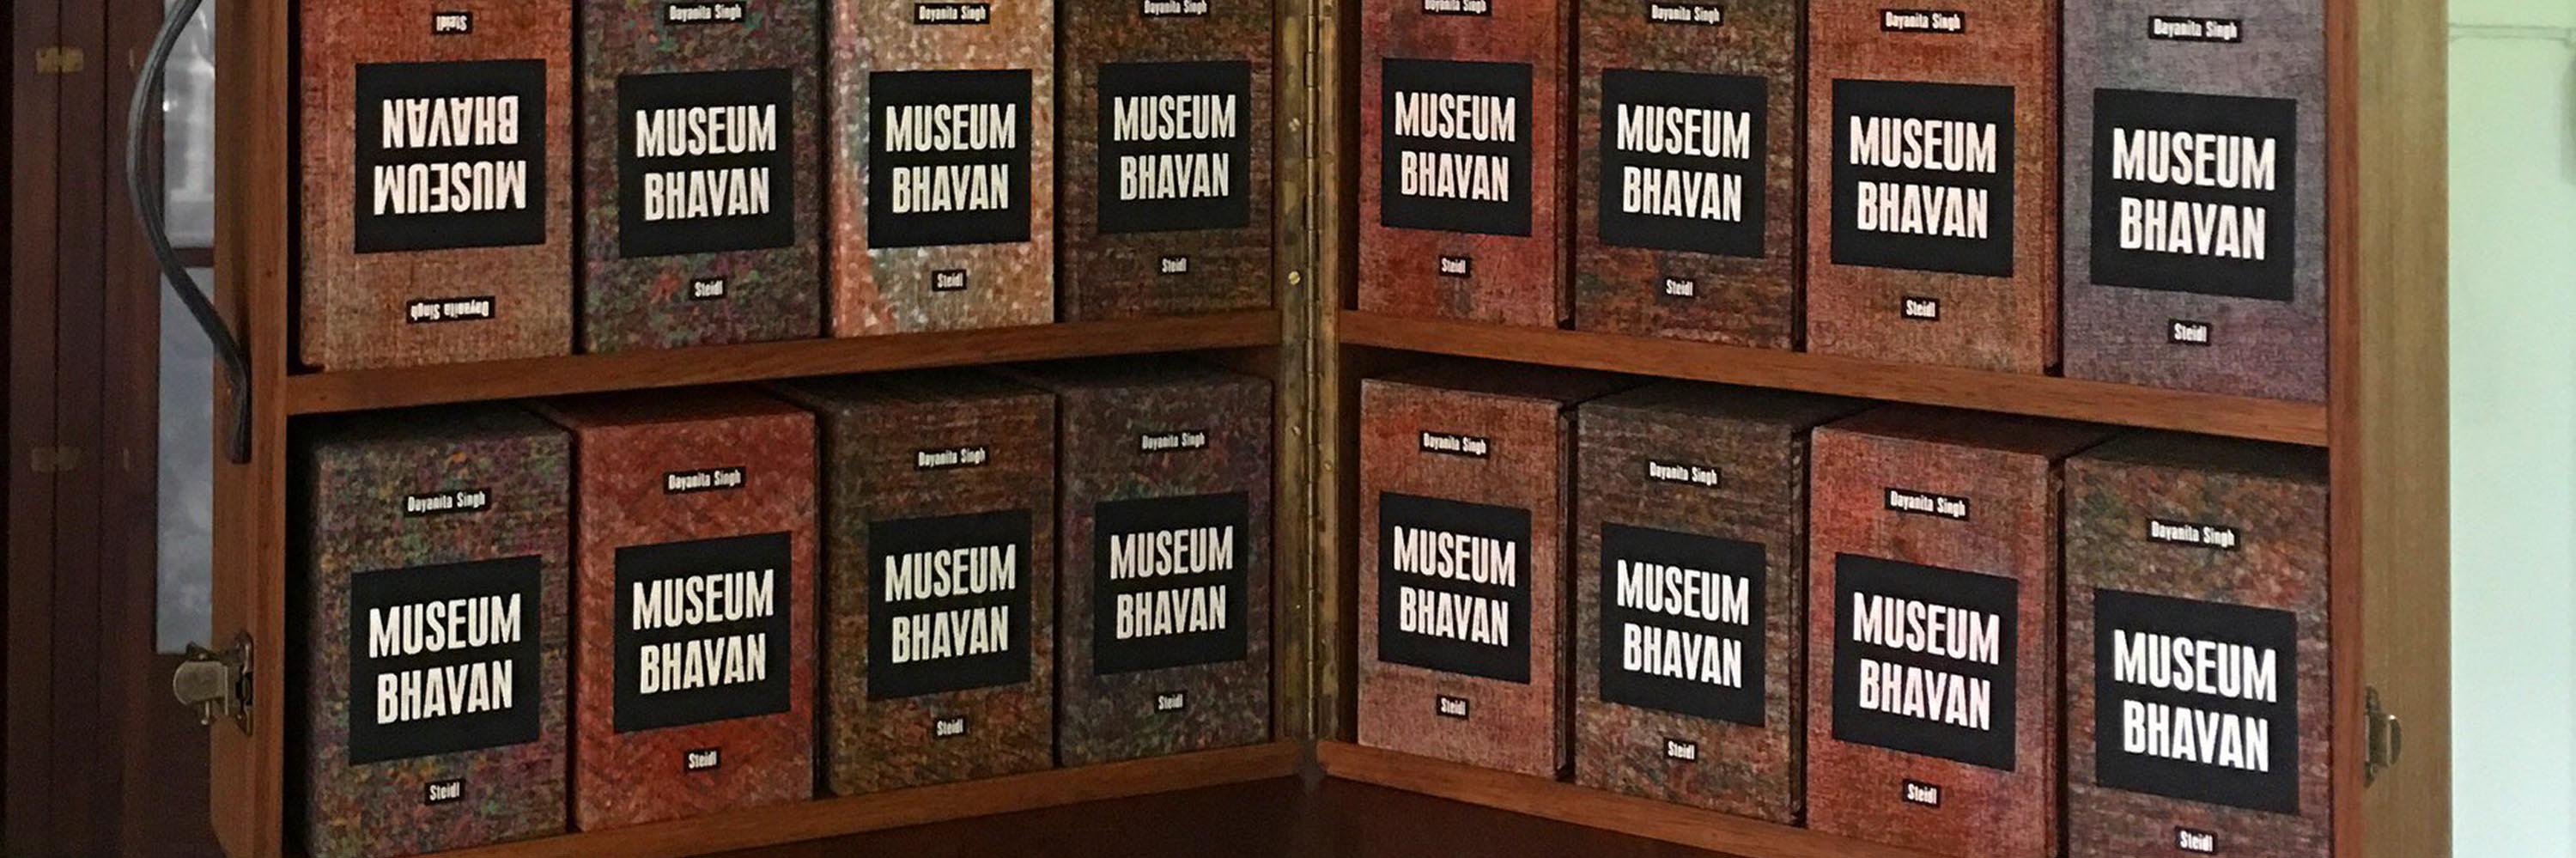 Wooden case containing several bound volumes labeled "Museum Bhavan"